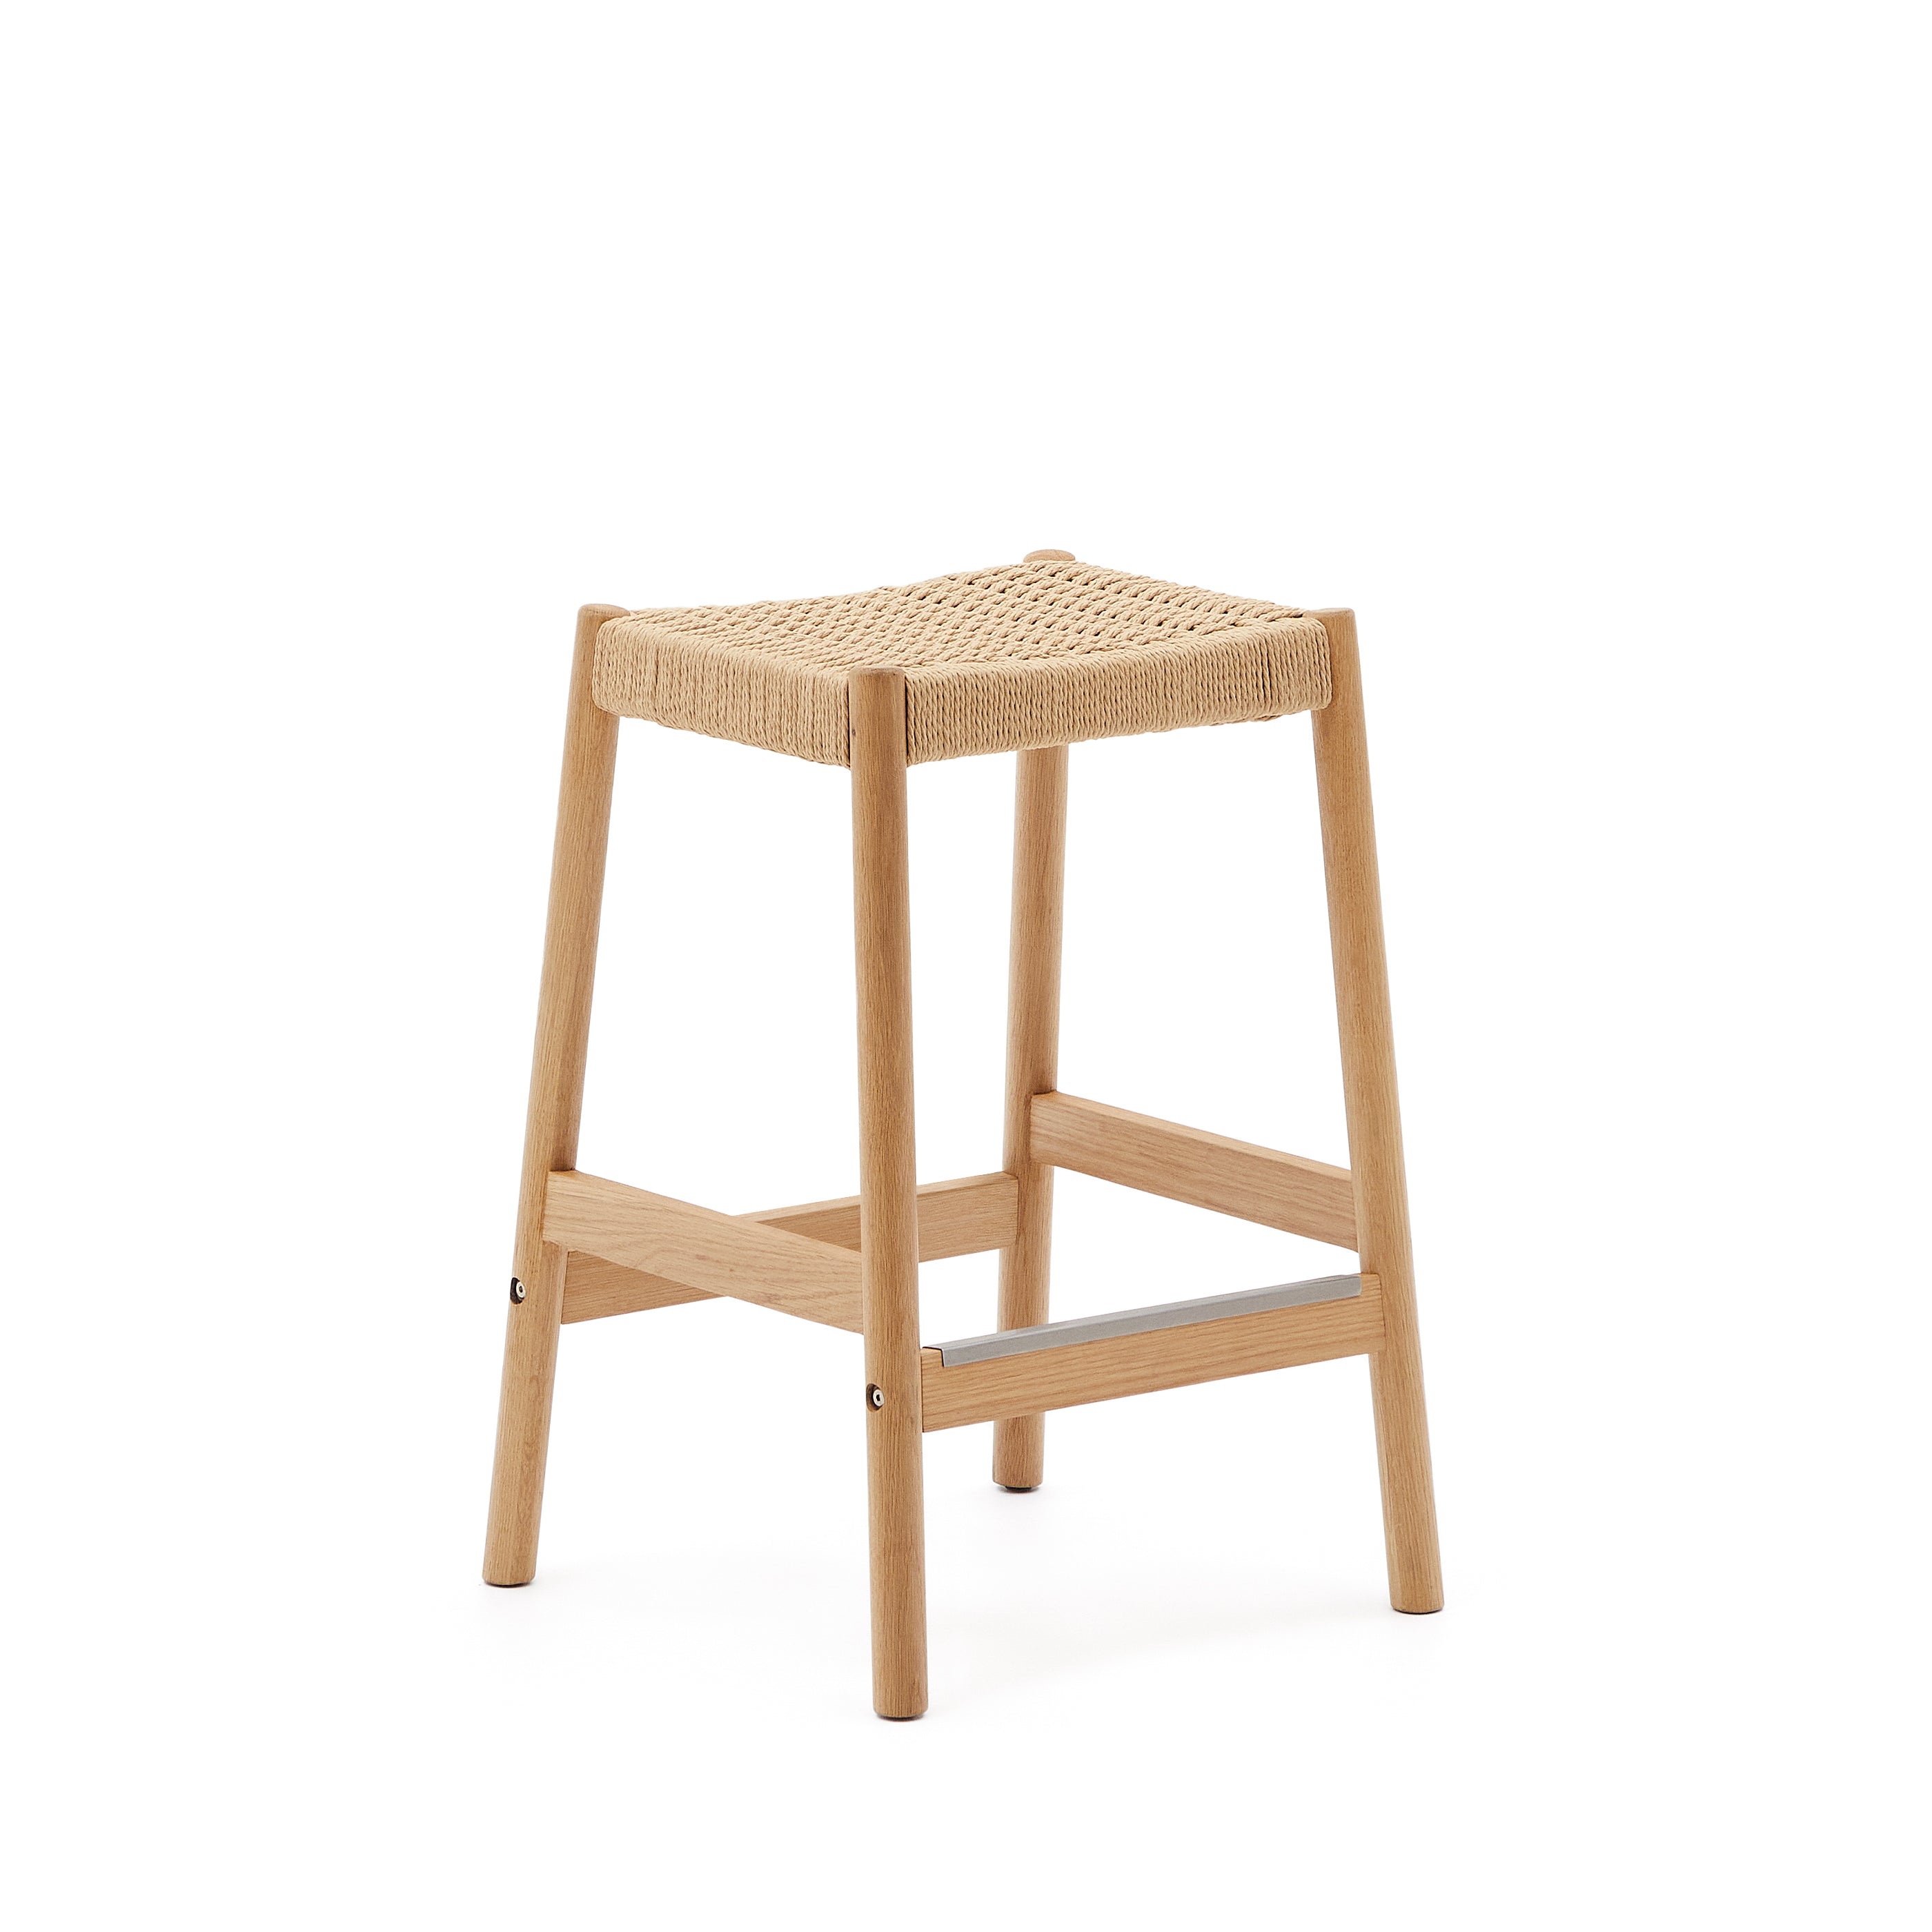 Yalia stool in solid oak with natural finish and rope seat, height 65 cm 100% FSC